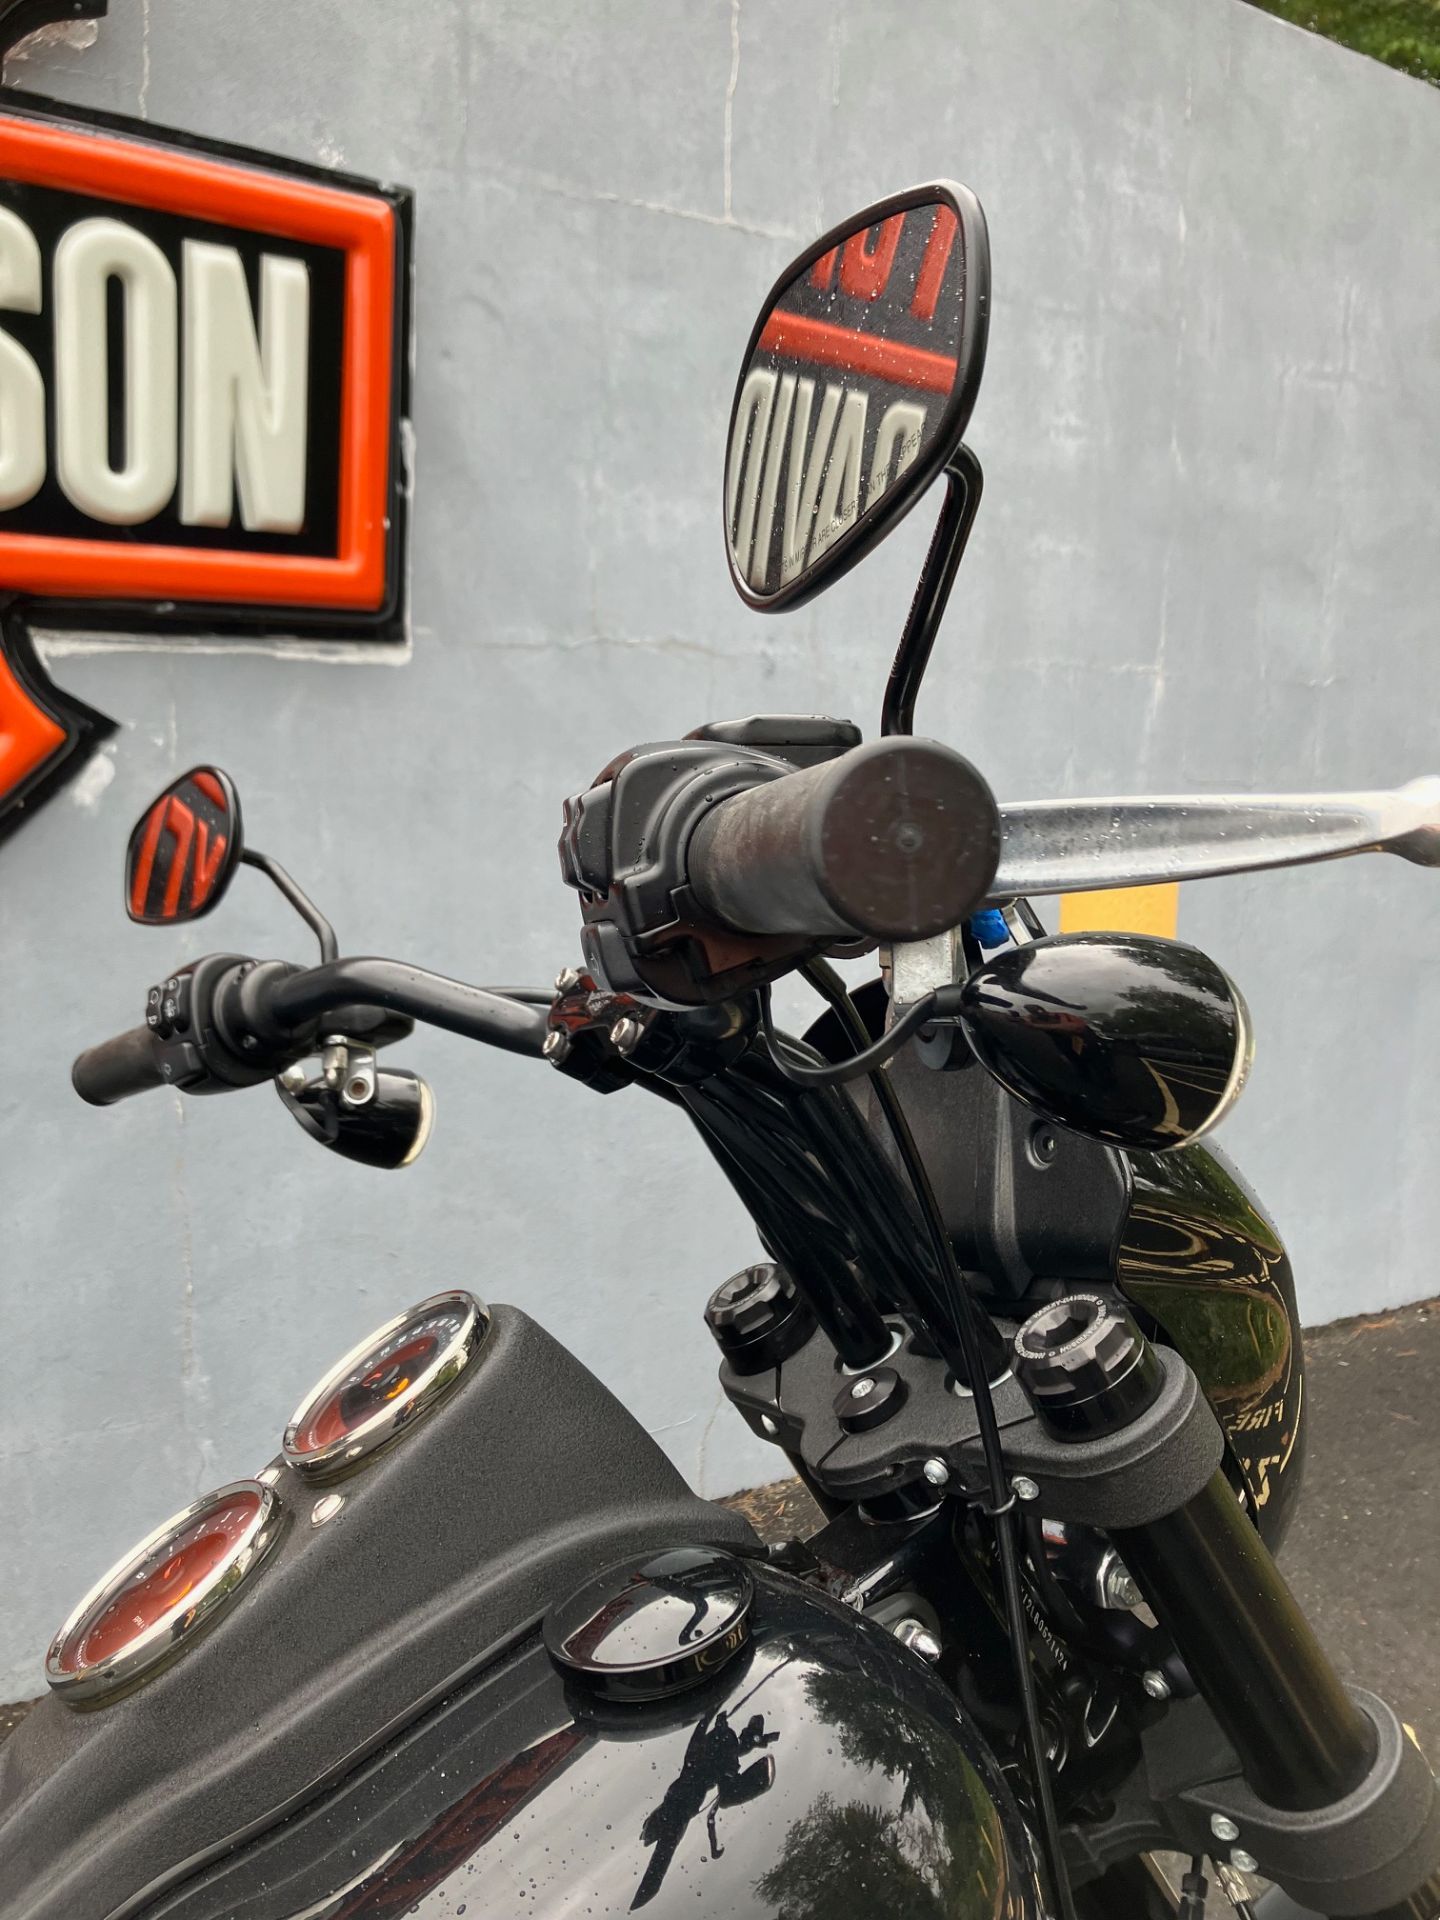 2020 Harley-Davidson LOW RIDER S in West Long Branch, New Jersey - Photo 9